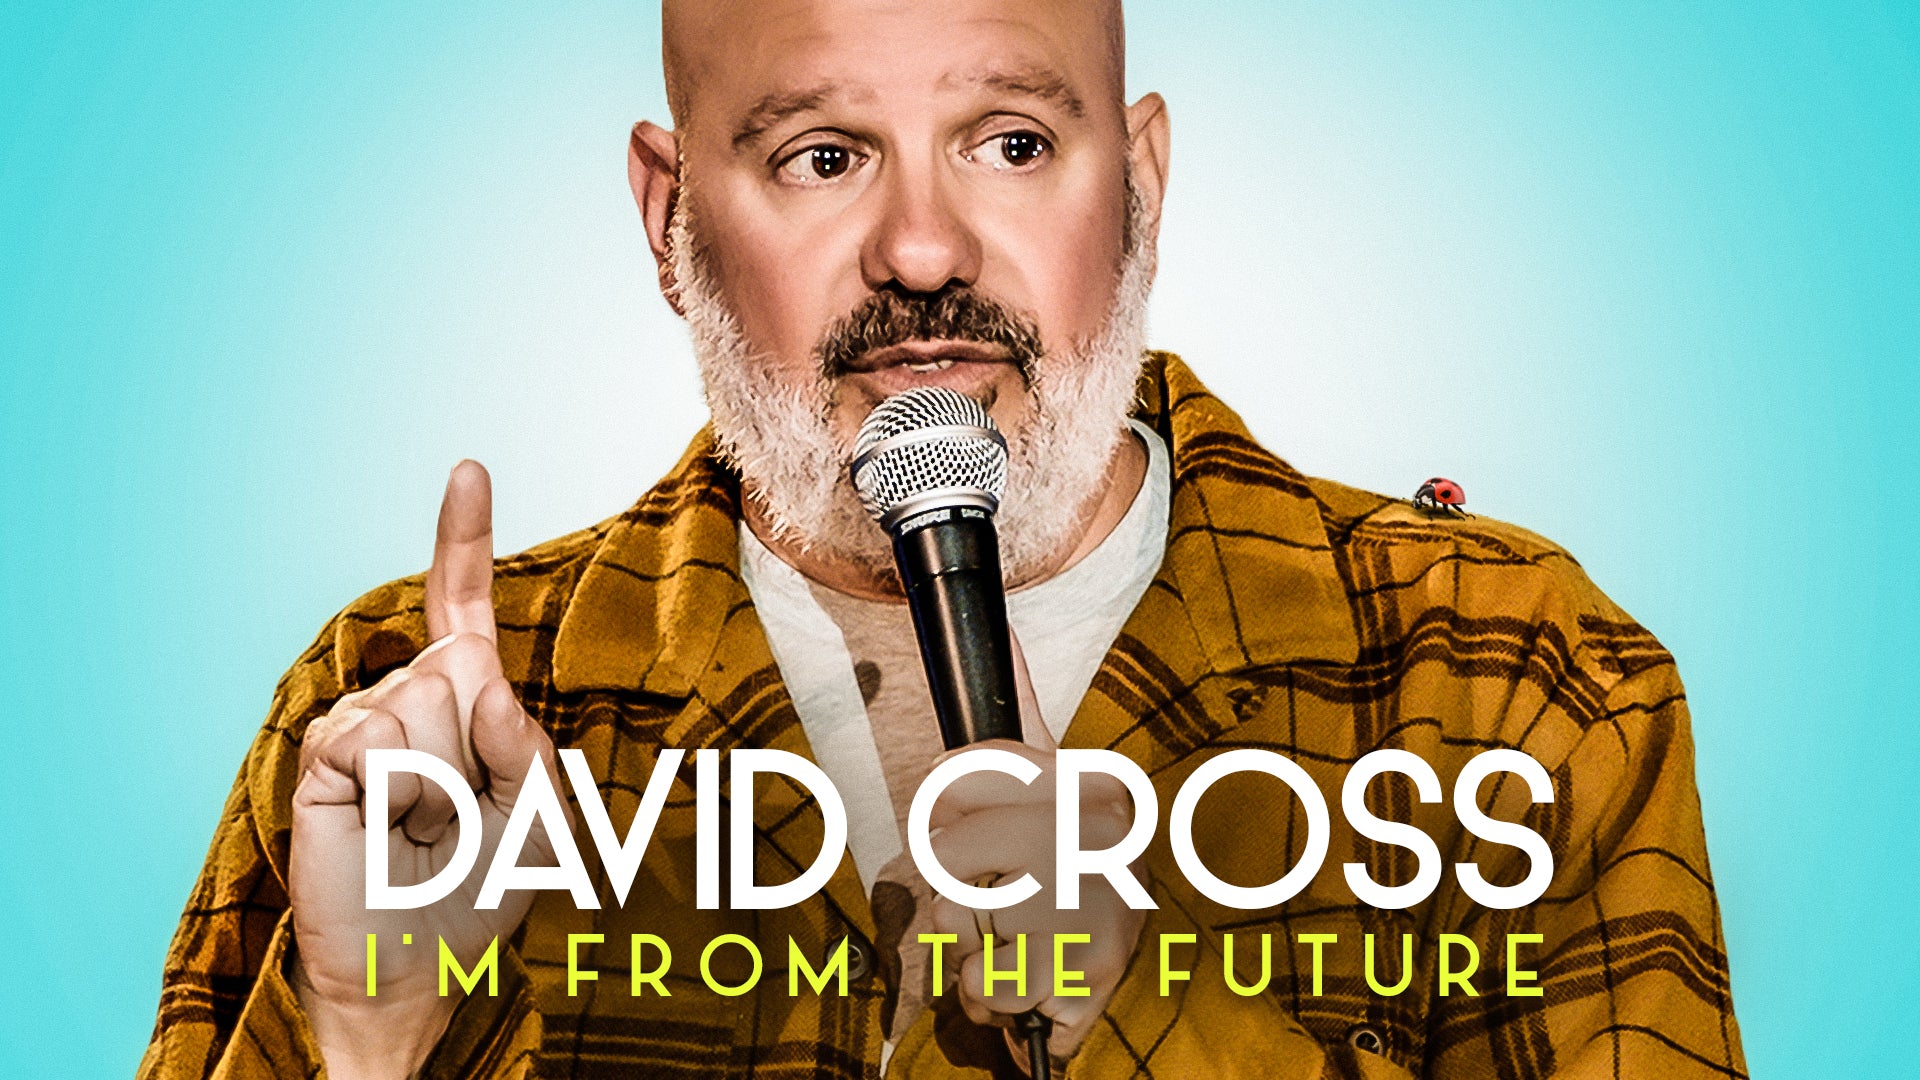 Announcing my brand-new comedy special, I'M FROM THE FUTURE